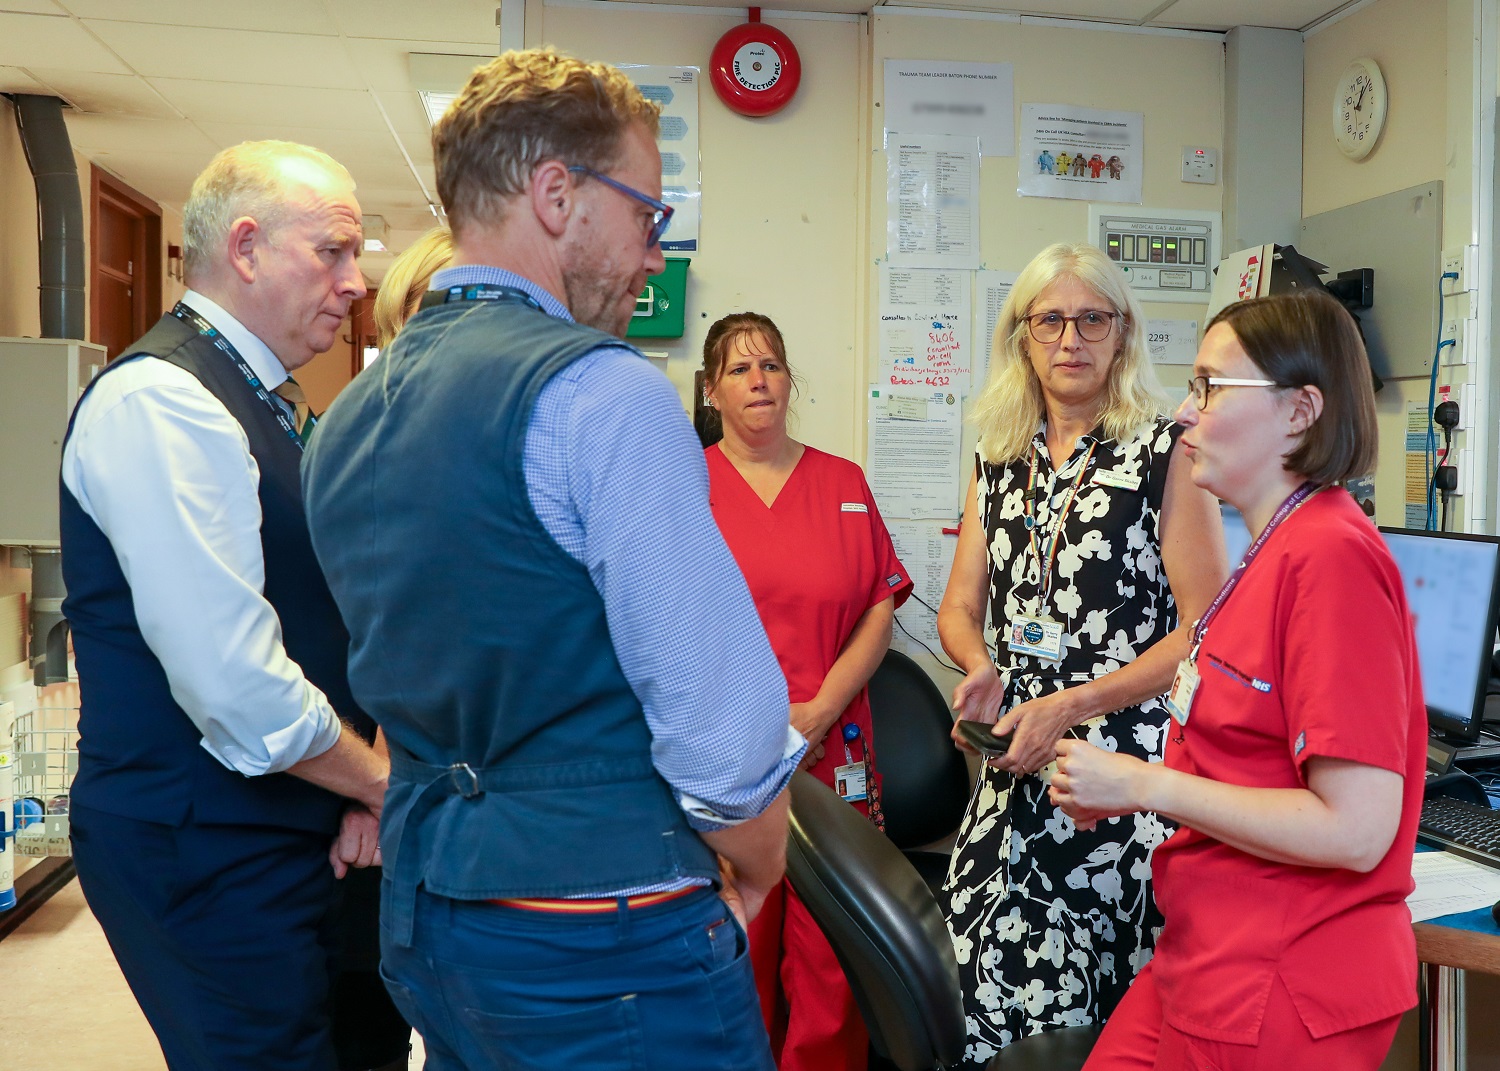 Lord Markham speaking with a a female staff member dressed in a red medical uniform